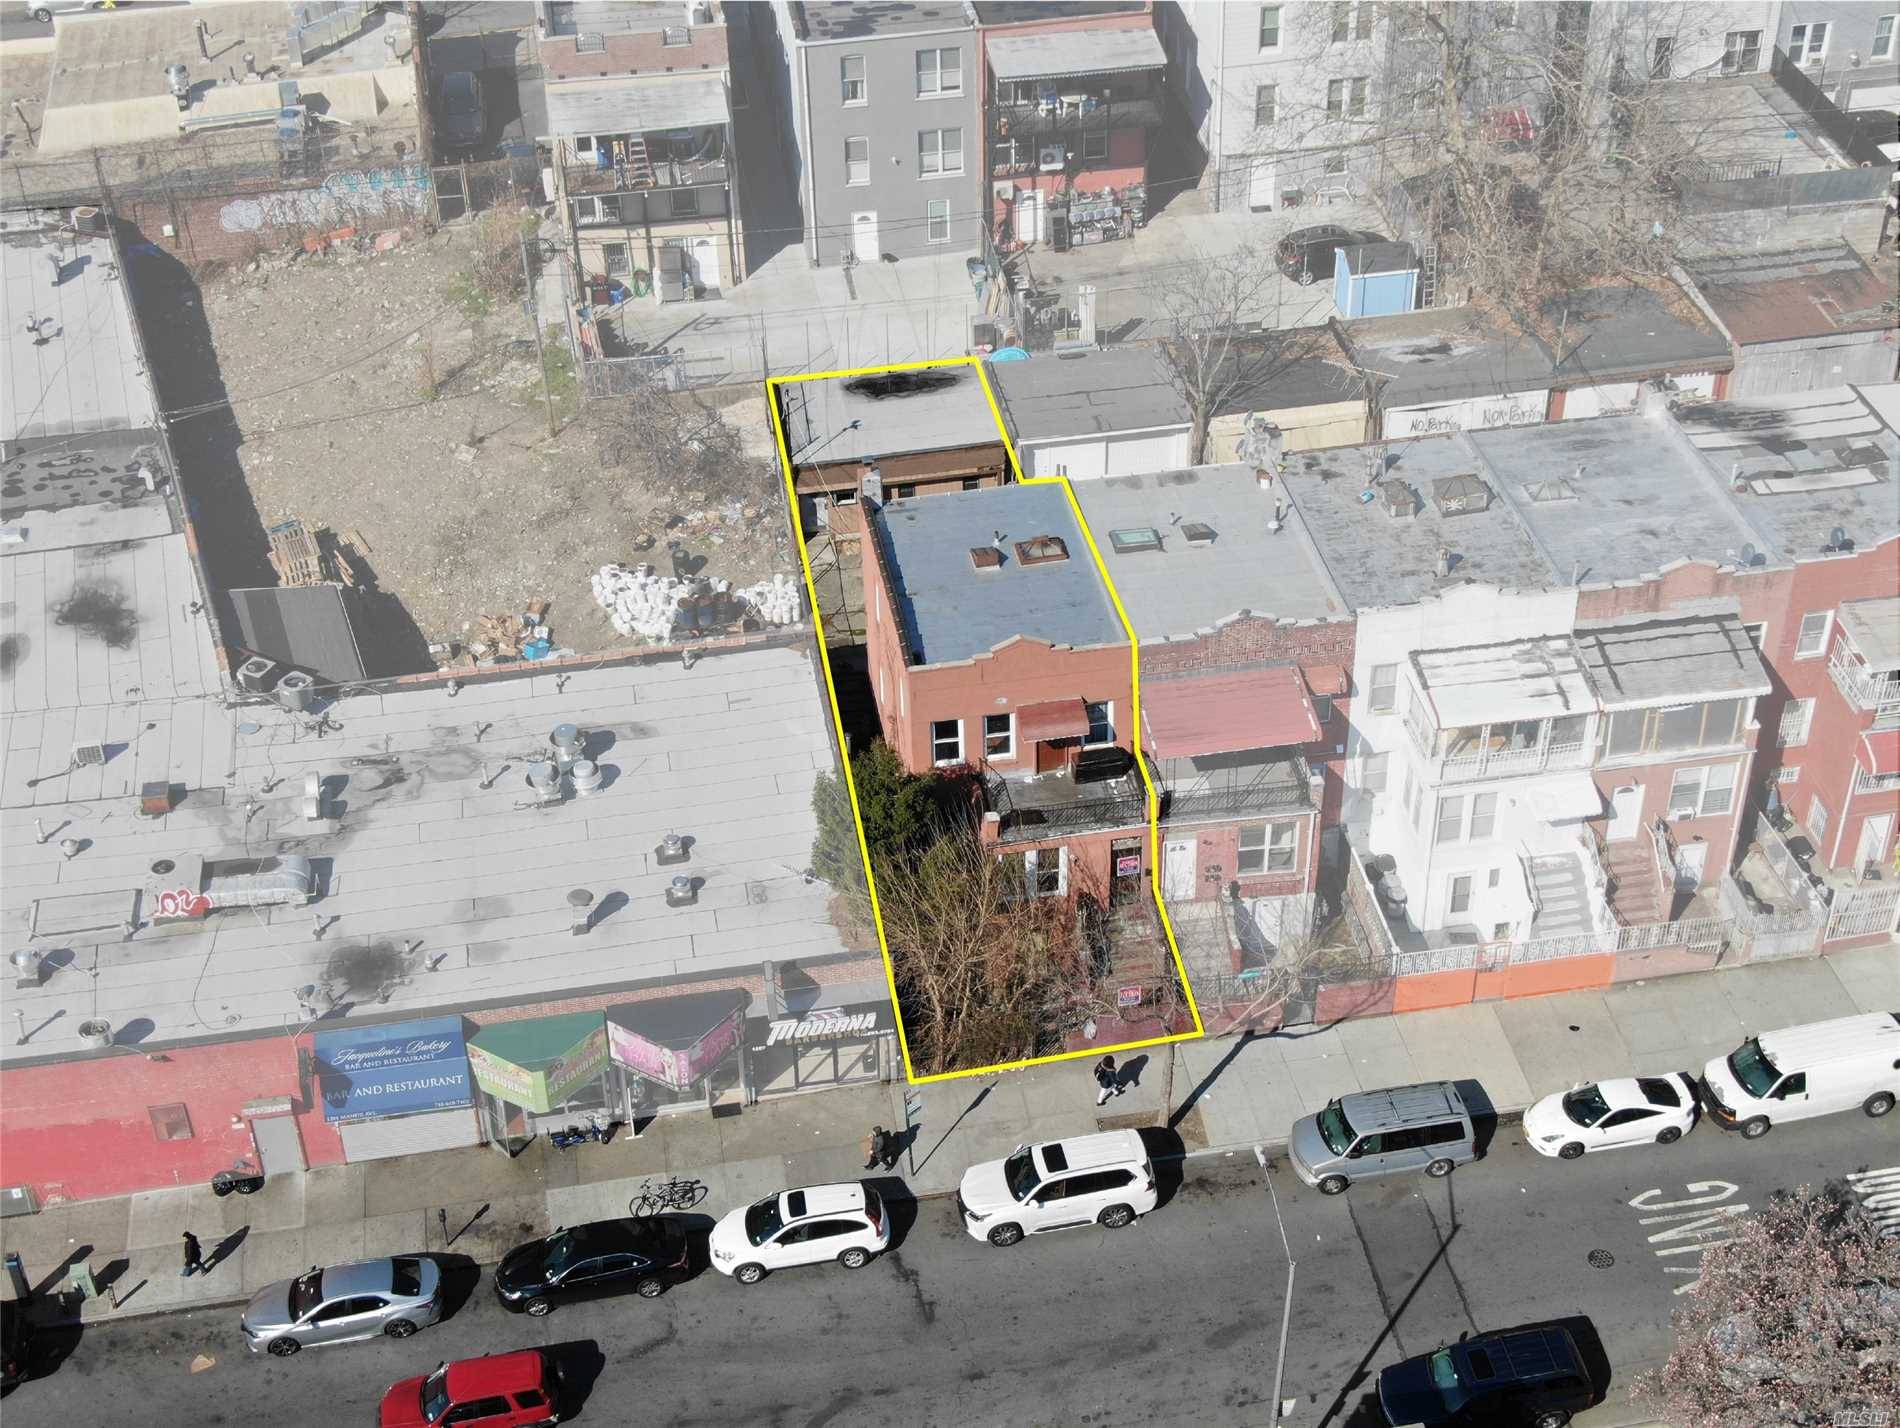 Two Family Home Potential Redevelopment Opportunity Air Rights !